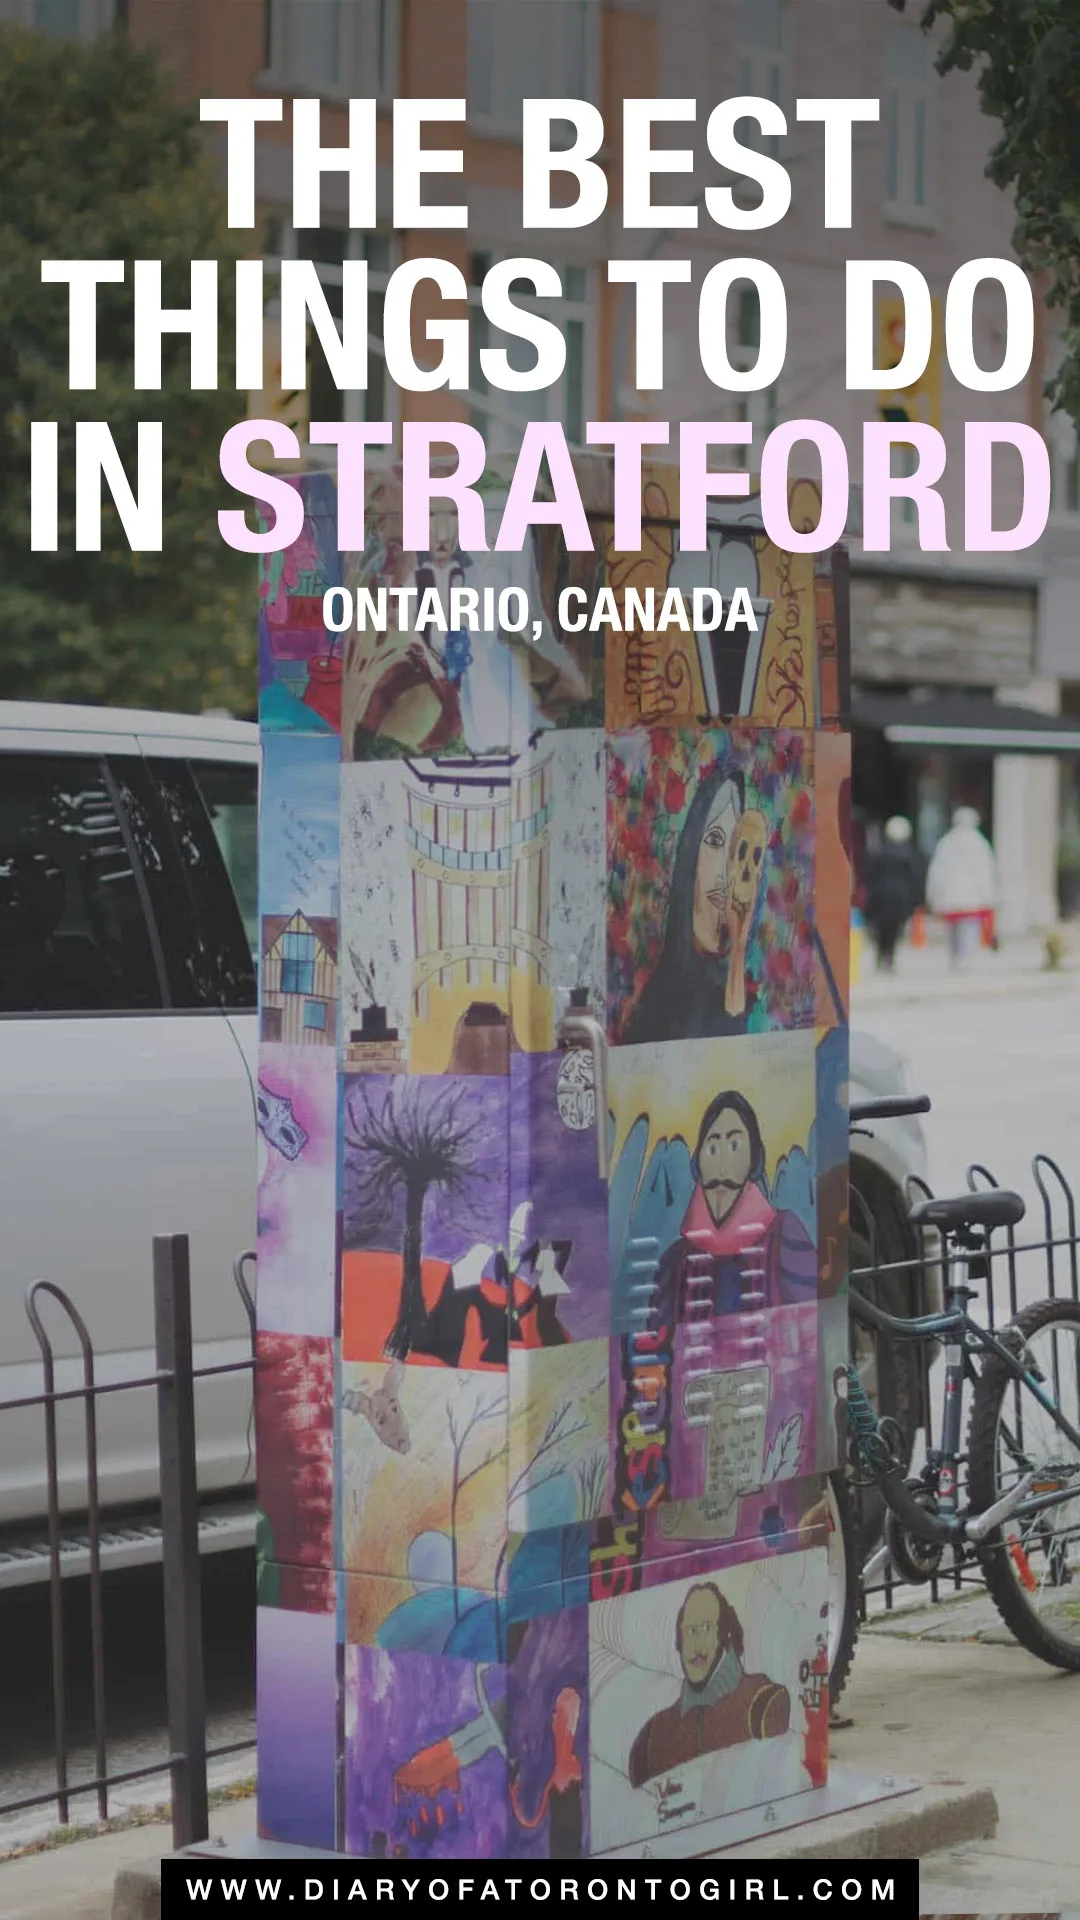 Fun things to do in Stratford, whether you're looking to check out local arts and culture or shop for Canadian-made goodies!